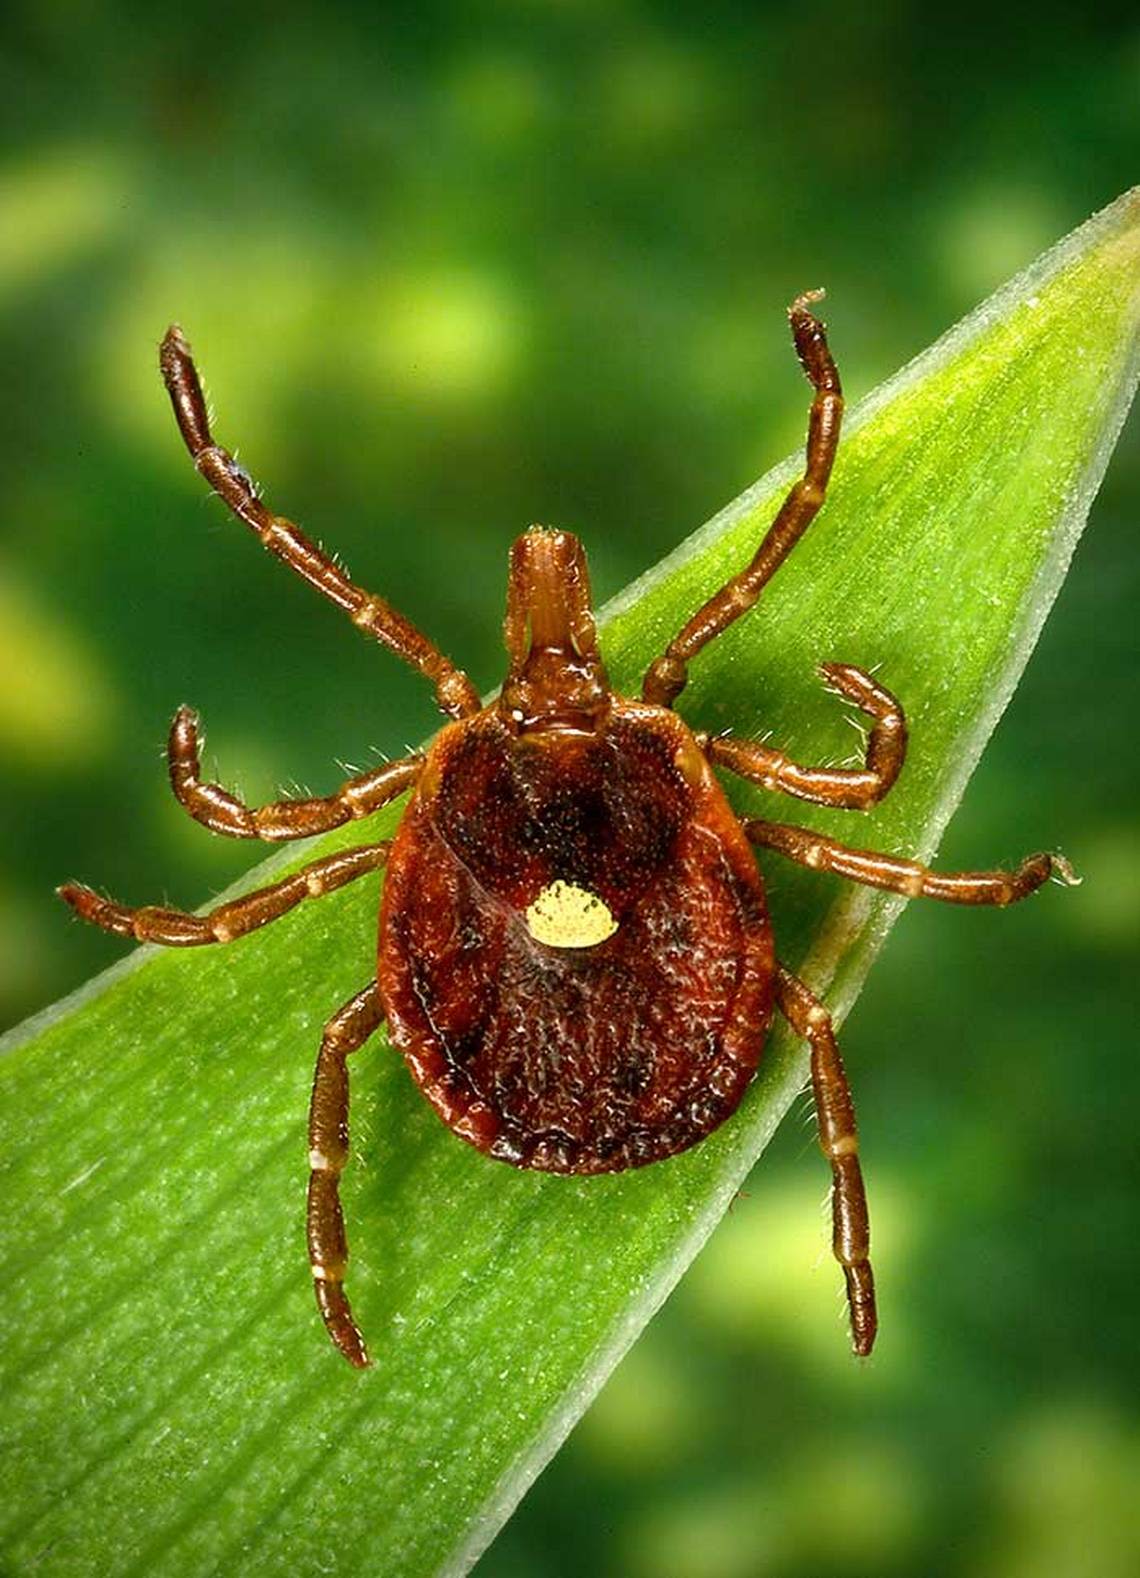 It’s likely to be an aggressive summer for ticks in KY. Here’s what to look out for